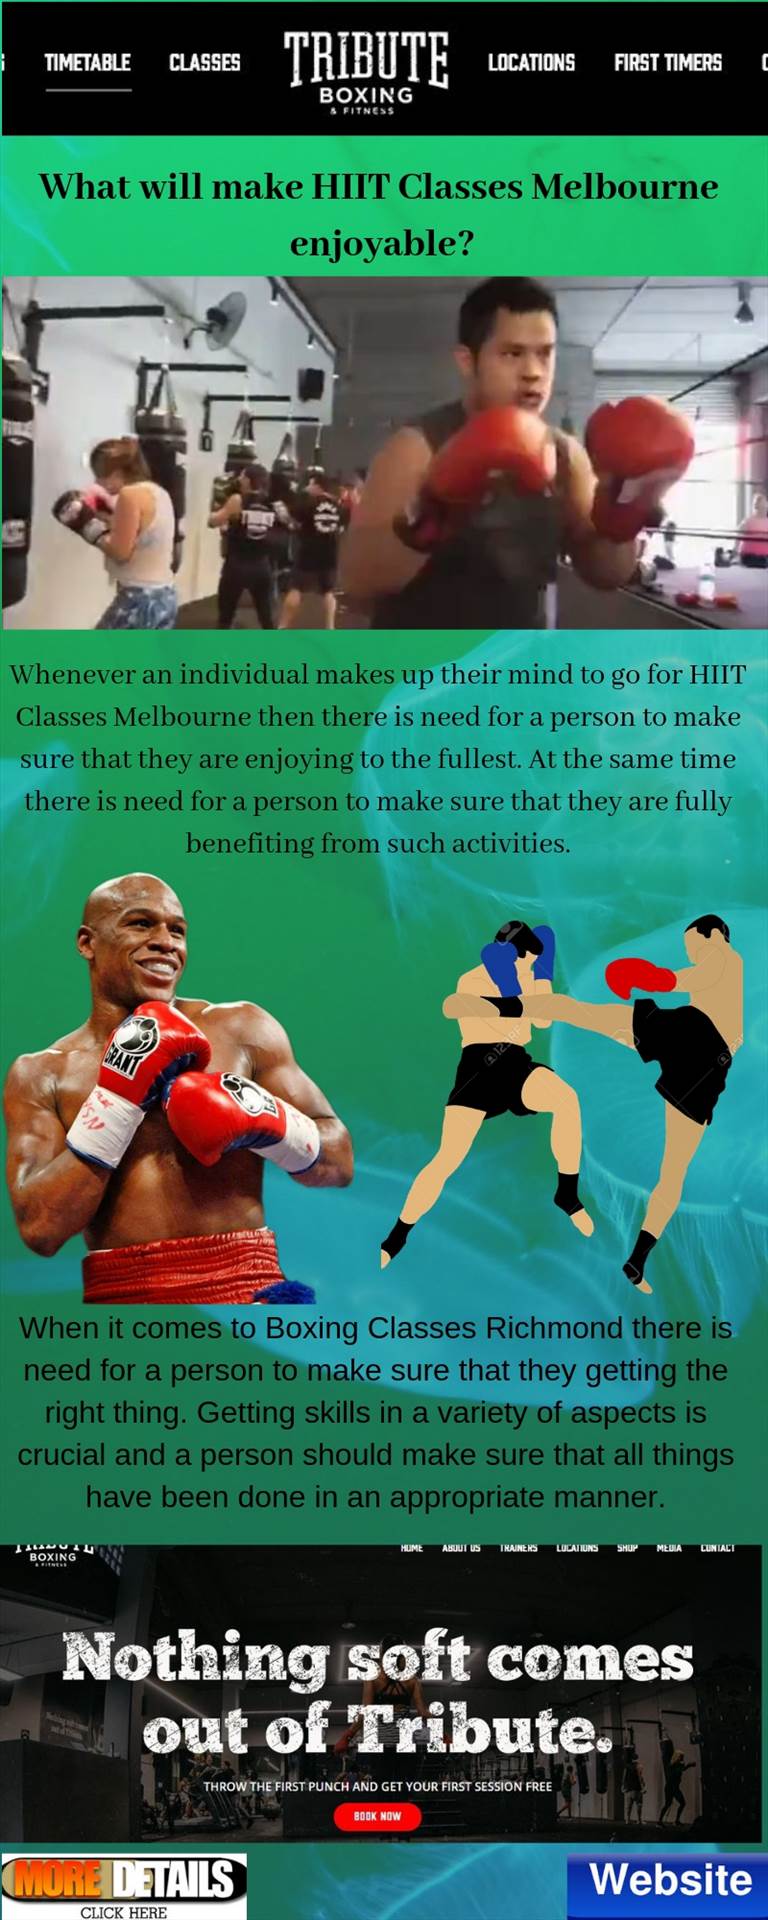 What will make HIIT Classes Melbourne enjoyable.jpg  by TributeBoxing